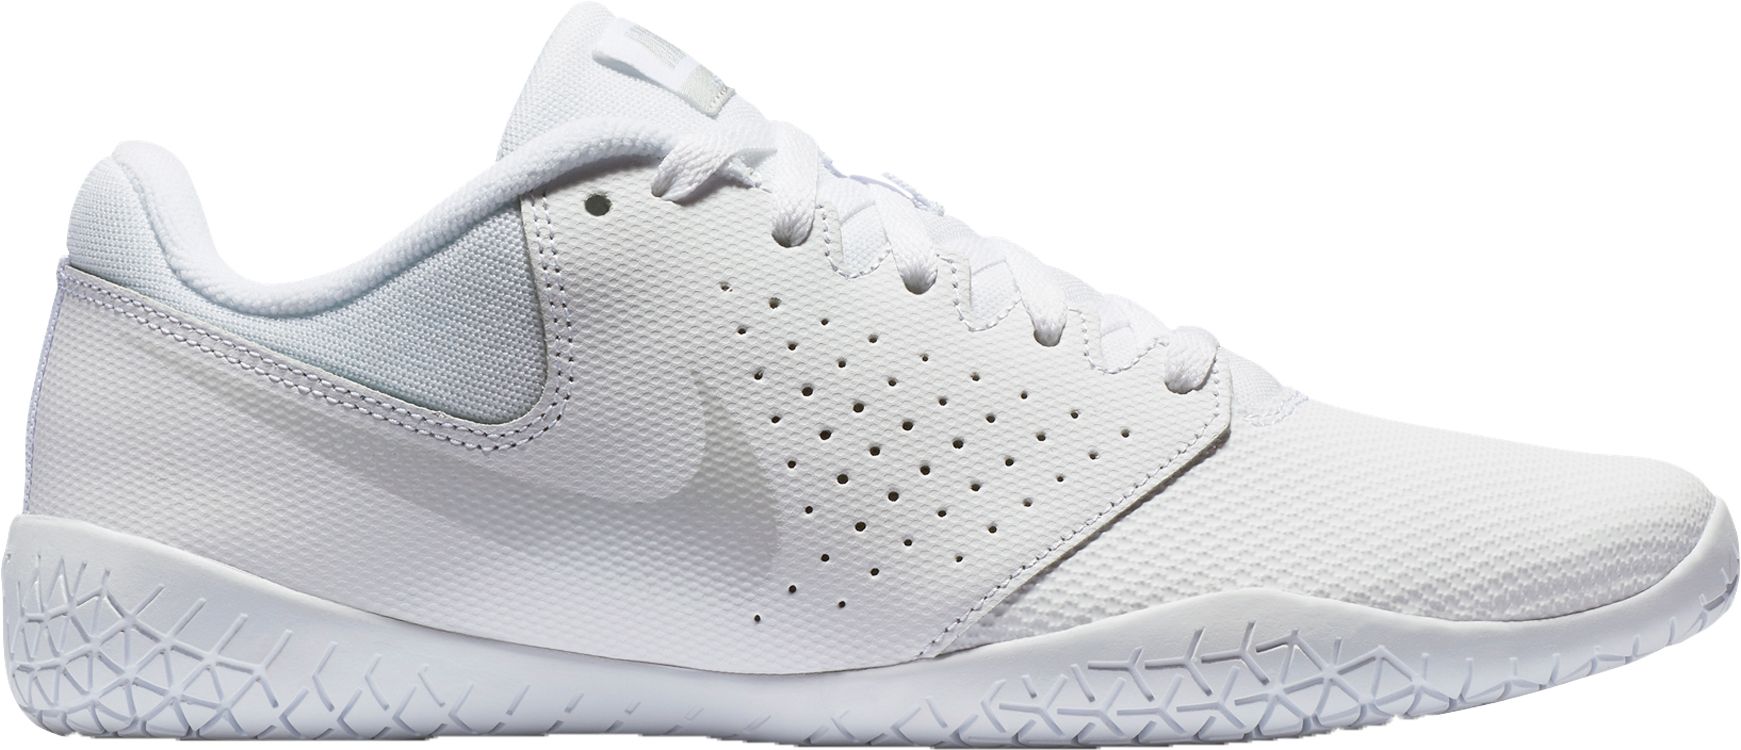 nike pro cheer shoes